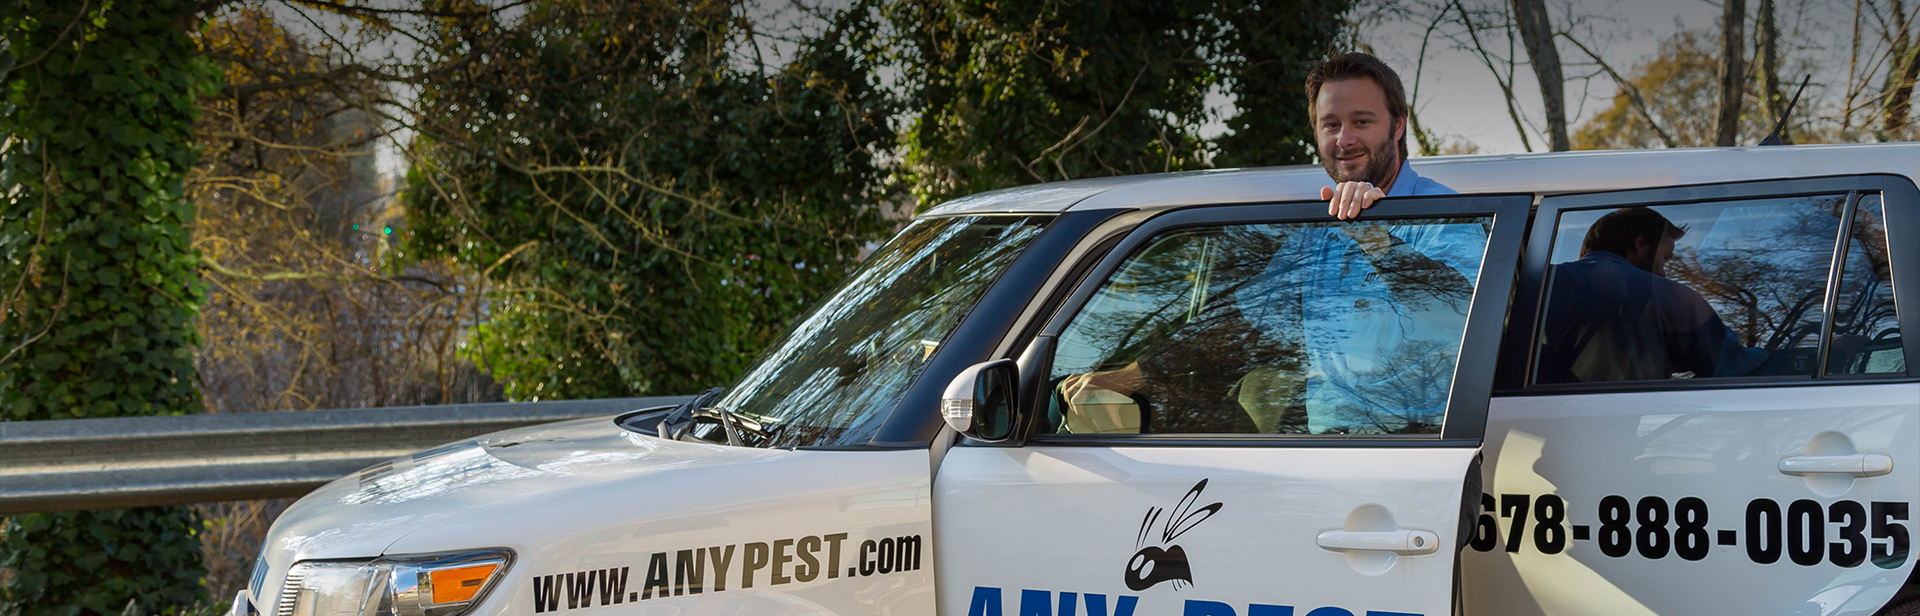 Pest Control Professional Male in Truck | Any Pest Inc.